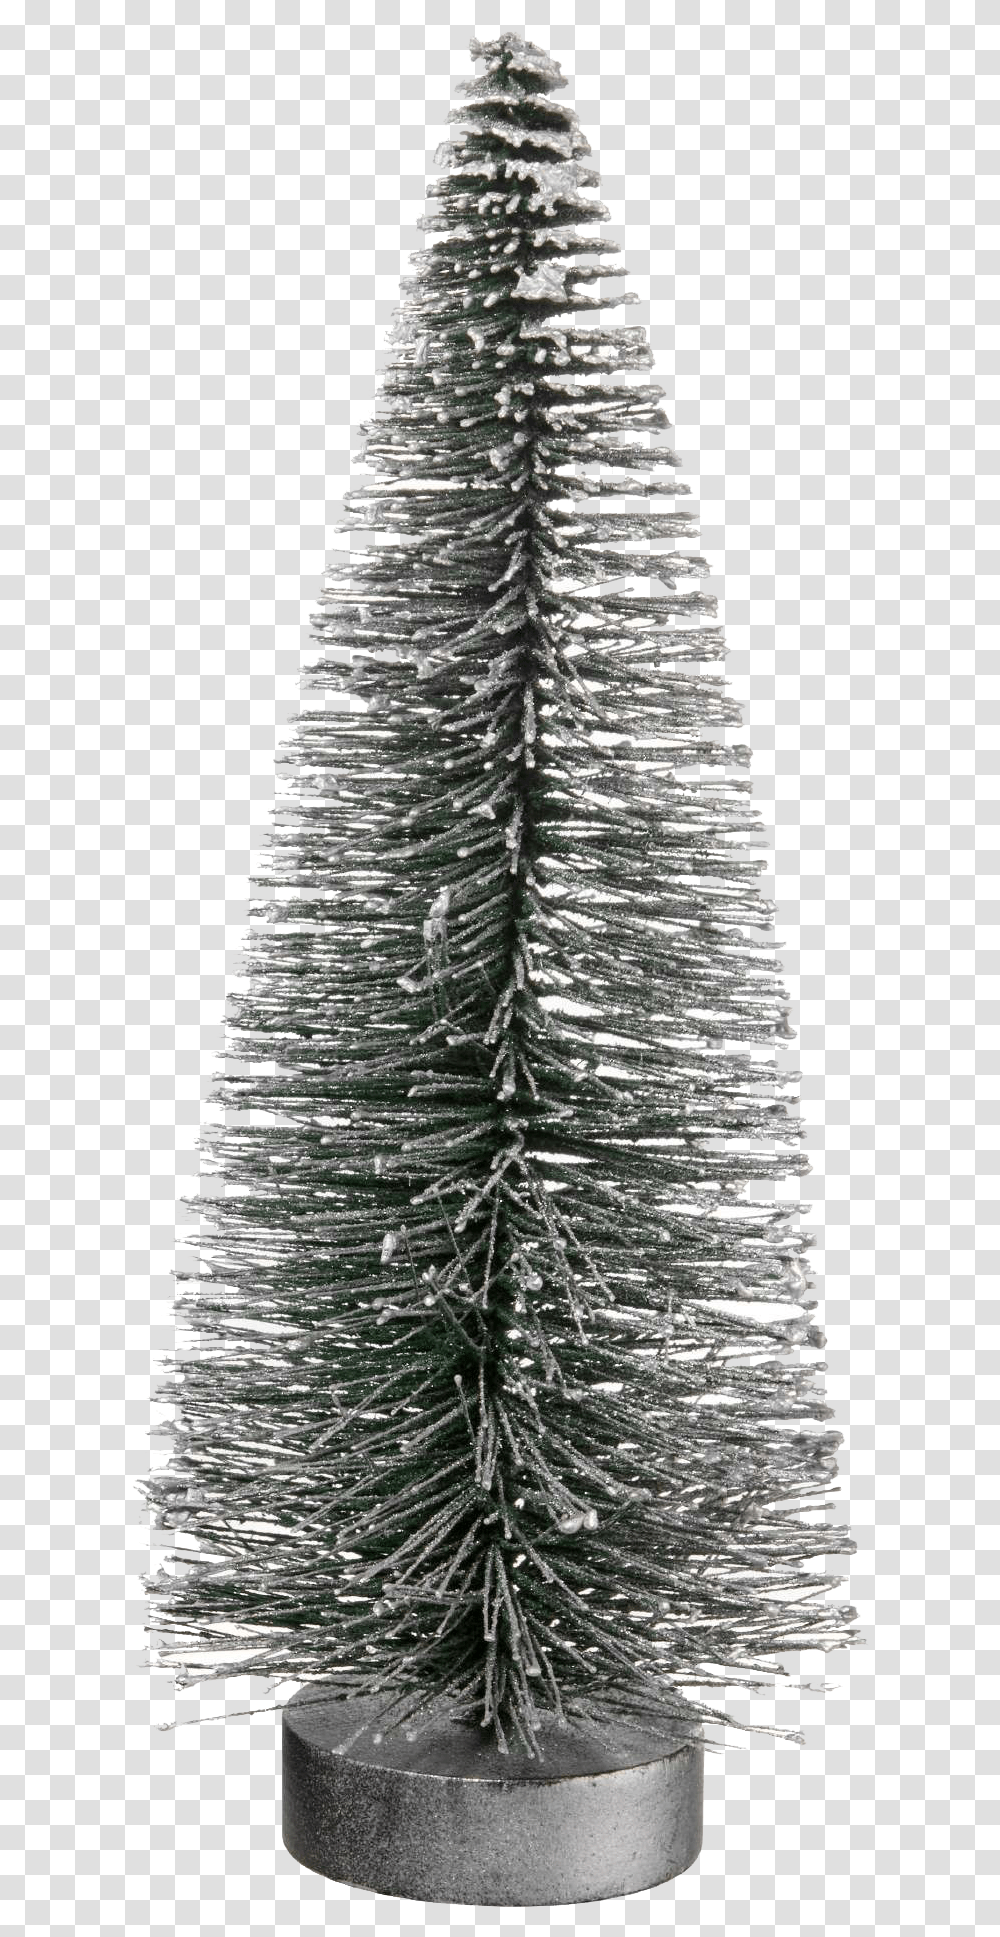 Fir Tree Image File Christmas Tree, Plant, Ornament, Pine, Abies Transparent Png